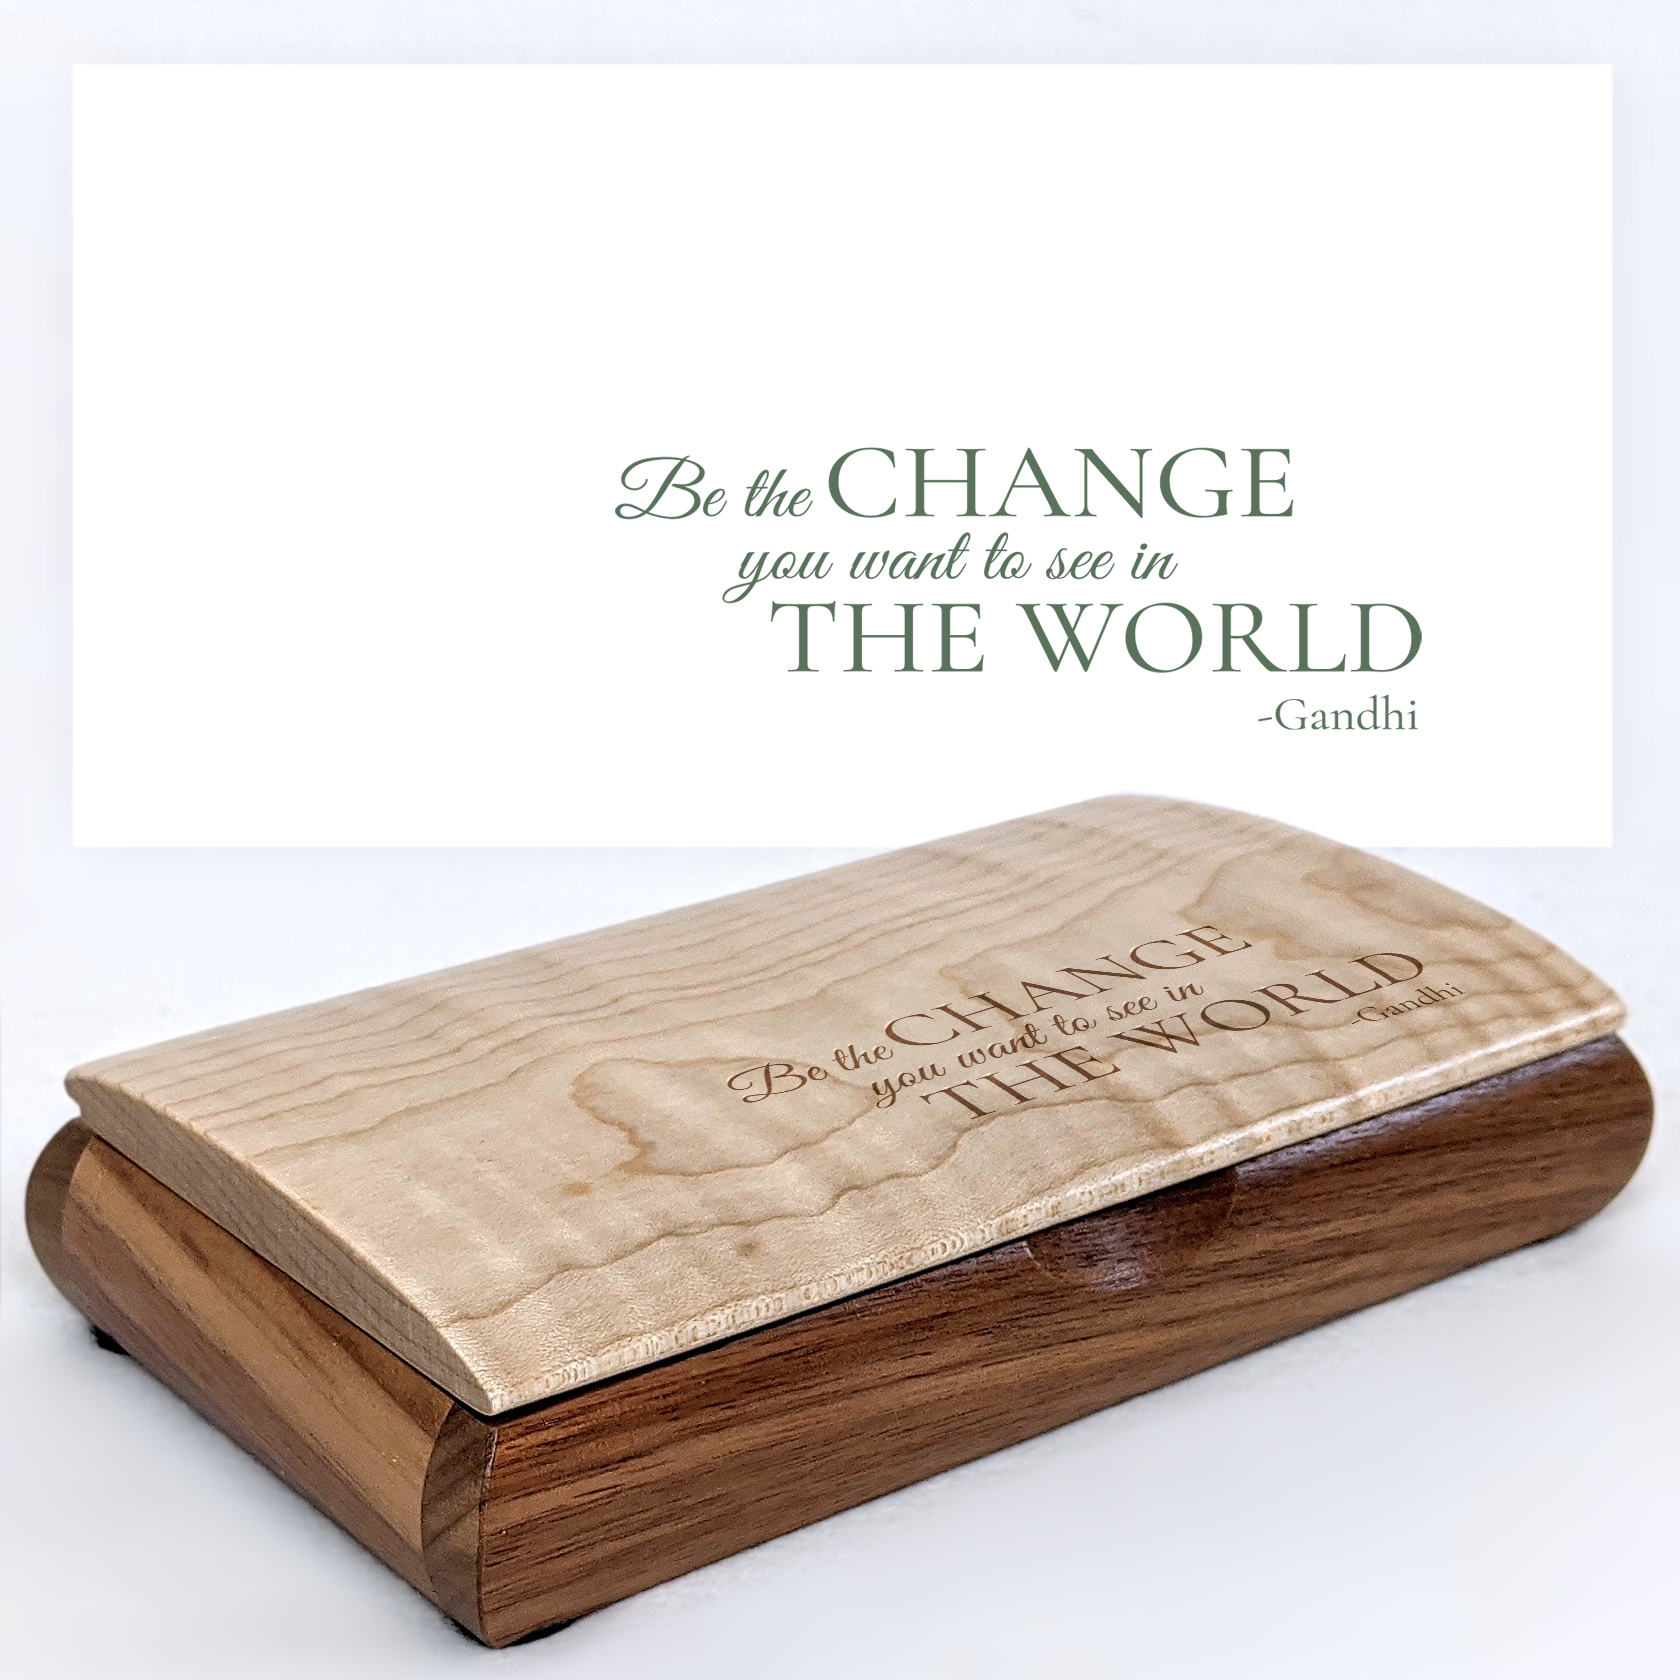 Wooden Boxes  Full Info All About Them - Wooden Earth